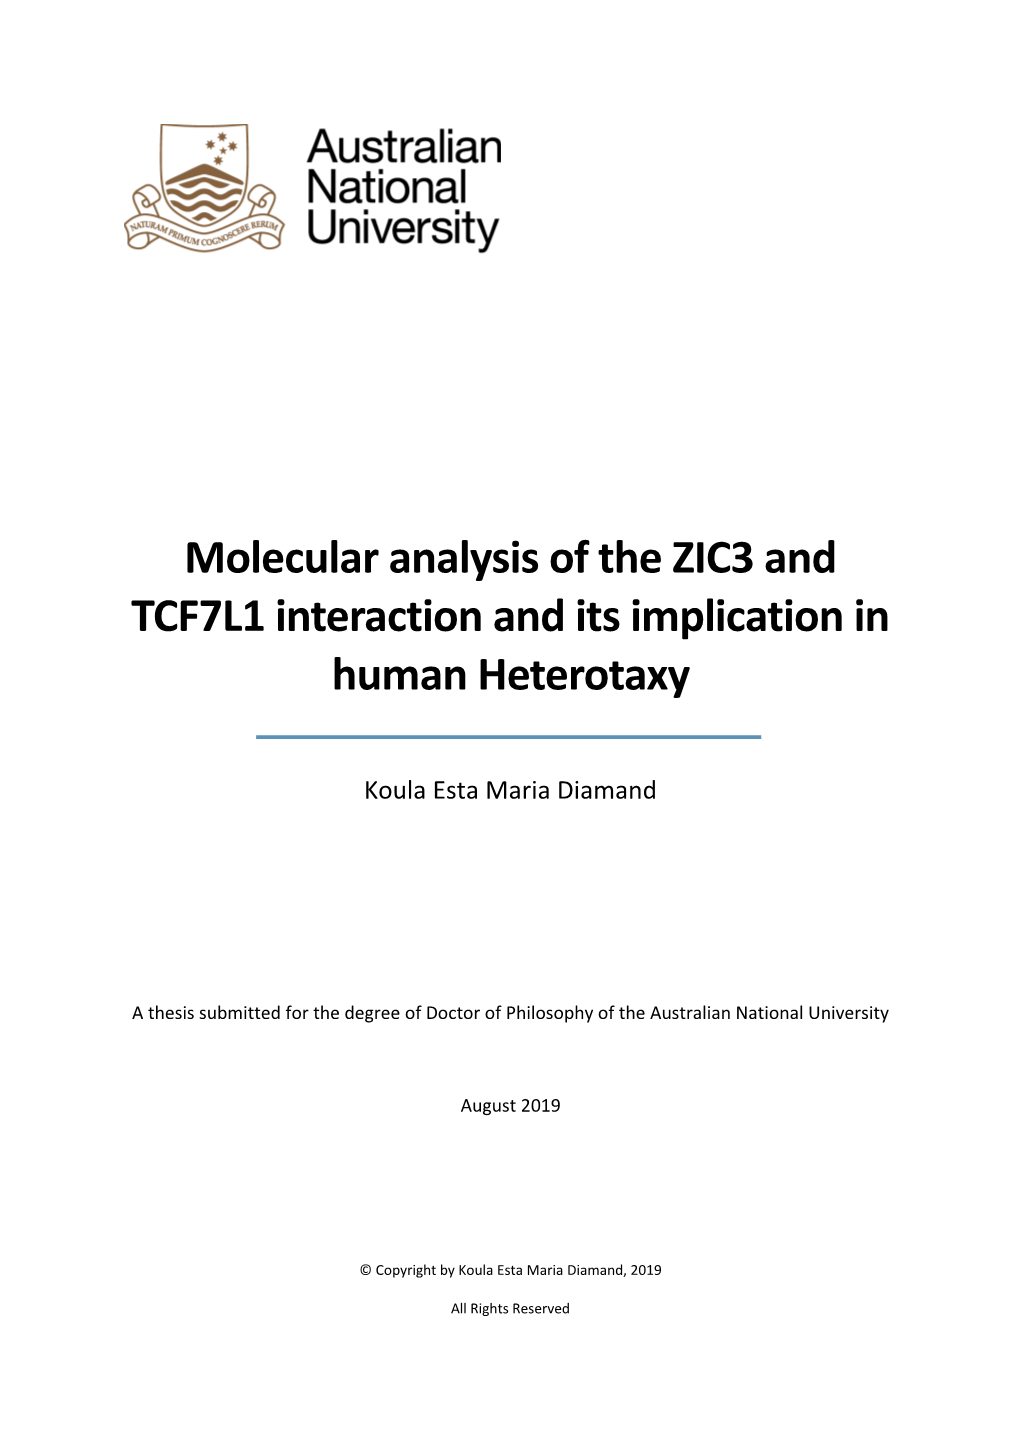 Molecular Analysis of the ZIC3 and TCF7L1 Interaction and Its Implication in Human Heterotaxy